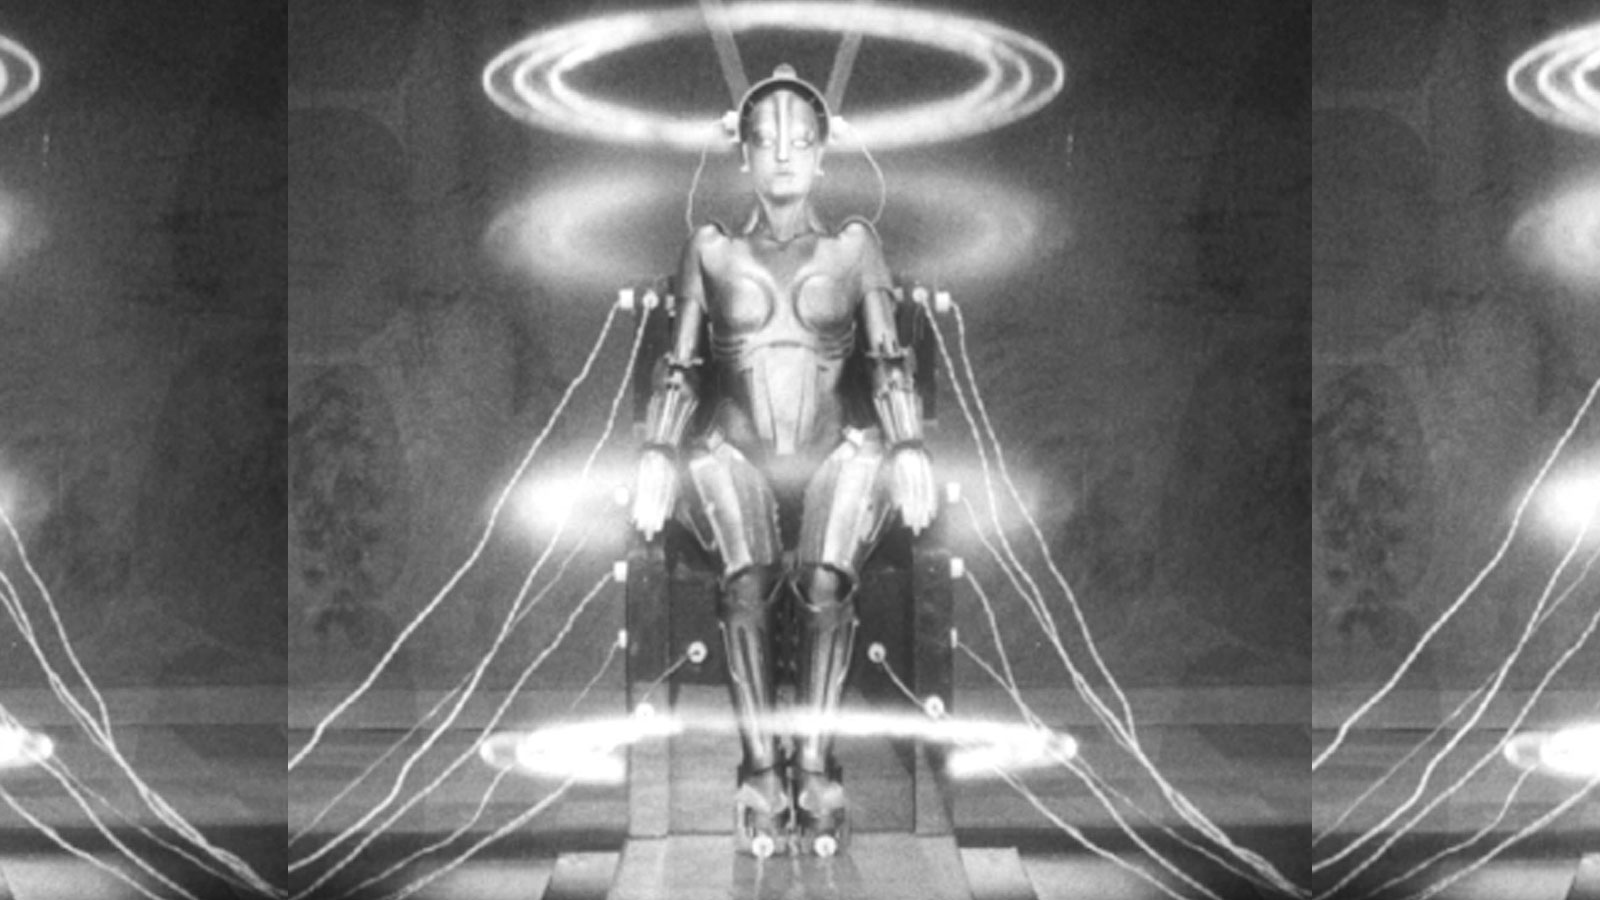 more footage from Metropolis
with Mammon the robot
in a chair
with wires feeding into her head
